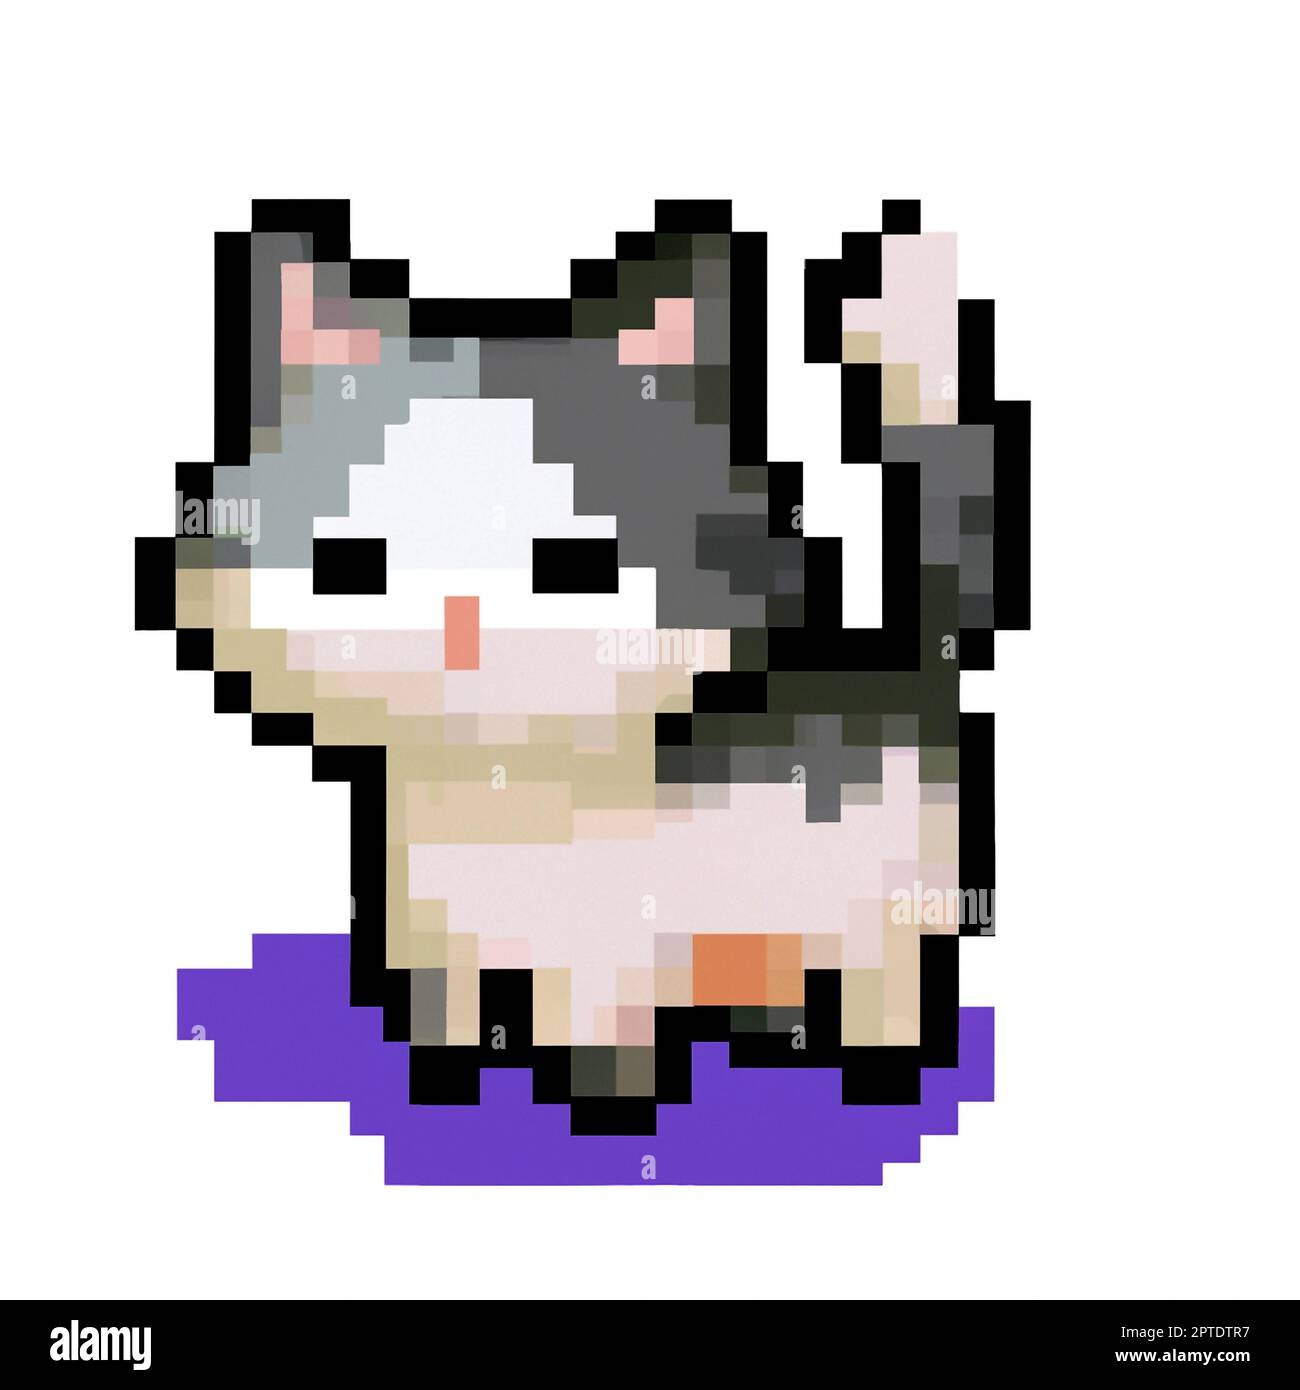 Just released a free sprite pack with a couple of cute cats 32x32 : r/ PixelArt